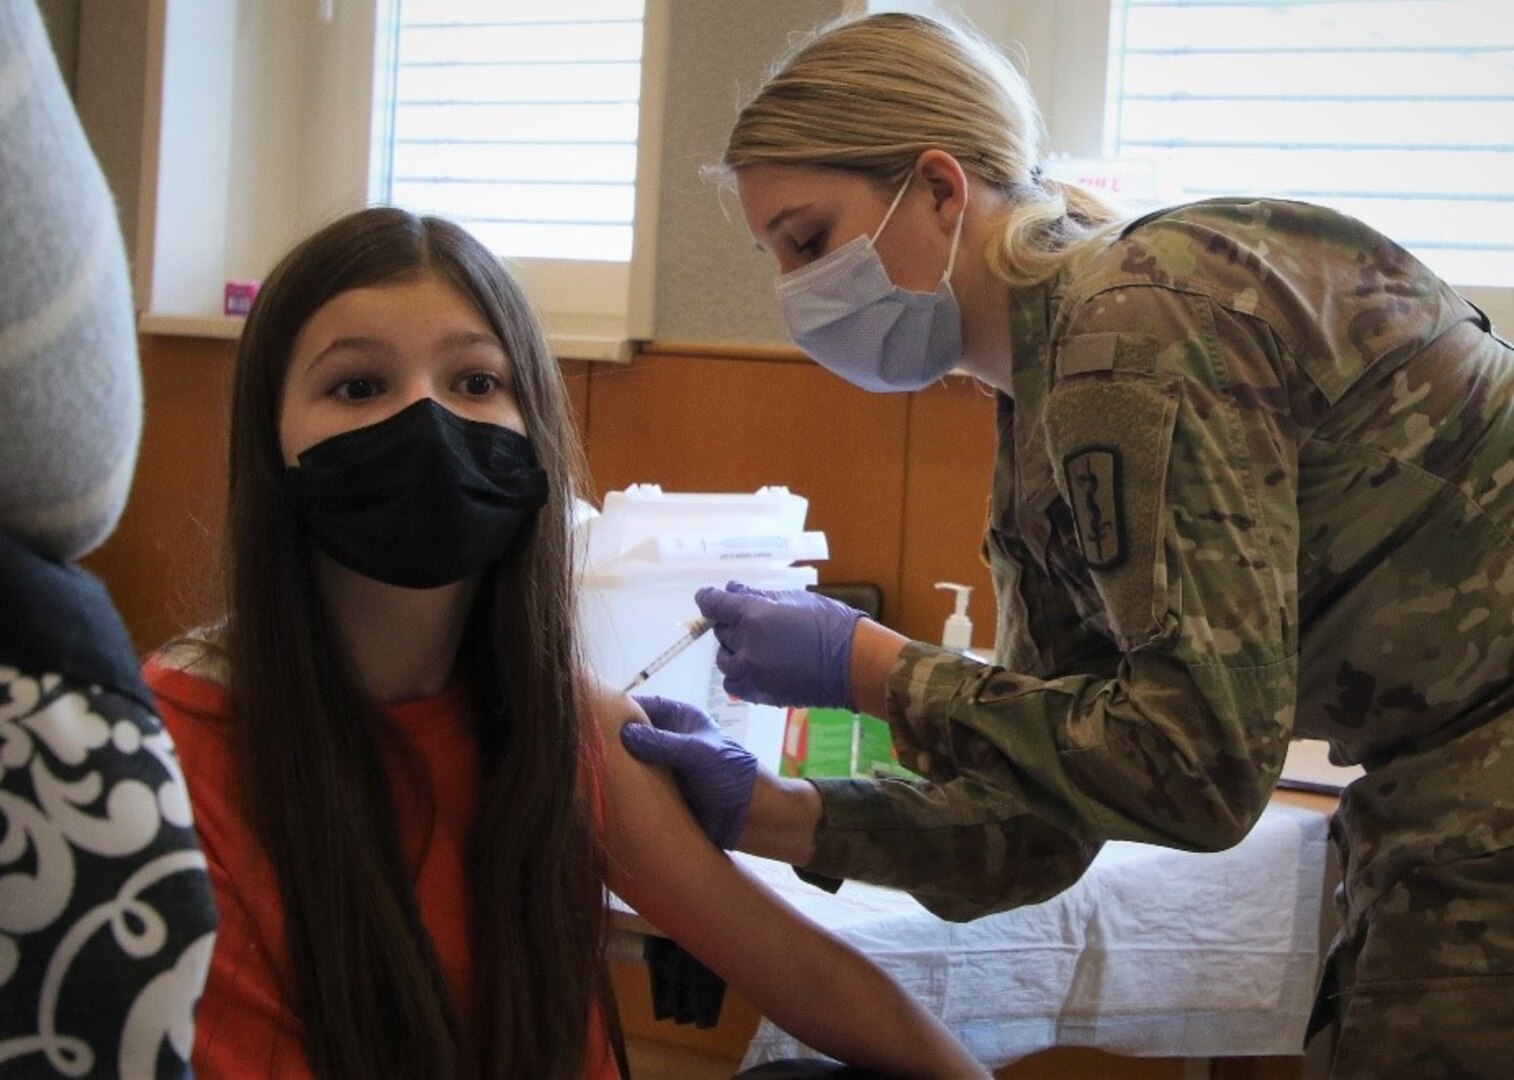 U.S. Army Spc. Kensey Frazee, Licensed Practical Nurse, 167th Medical Augmentation Detachment, 30th Medical Brigade, provides a COVID-19 Booster Vaccination to 13-year-old Heidi Hall at a Landstuhl Regional Medical Center COVID-19 Vaccination event, Jan. 6.